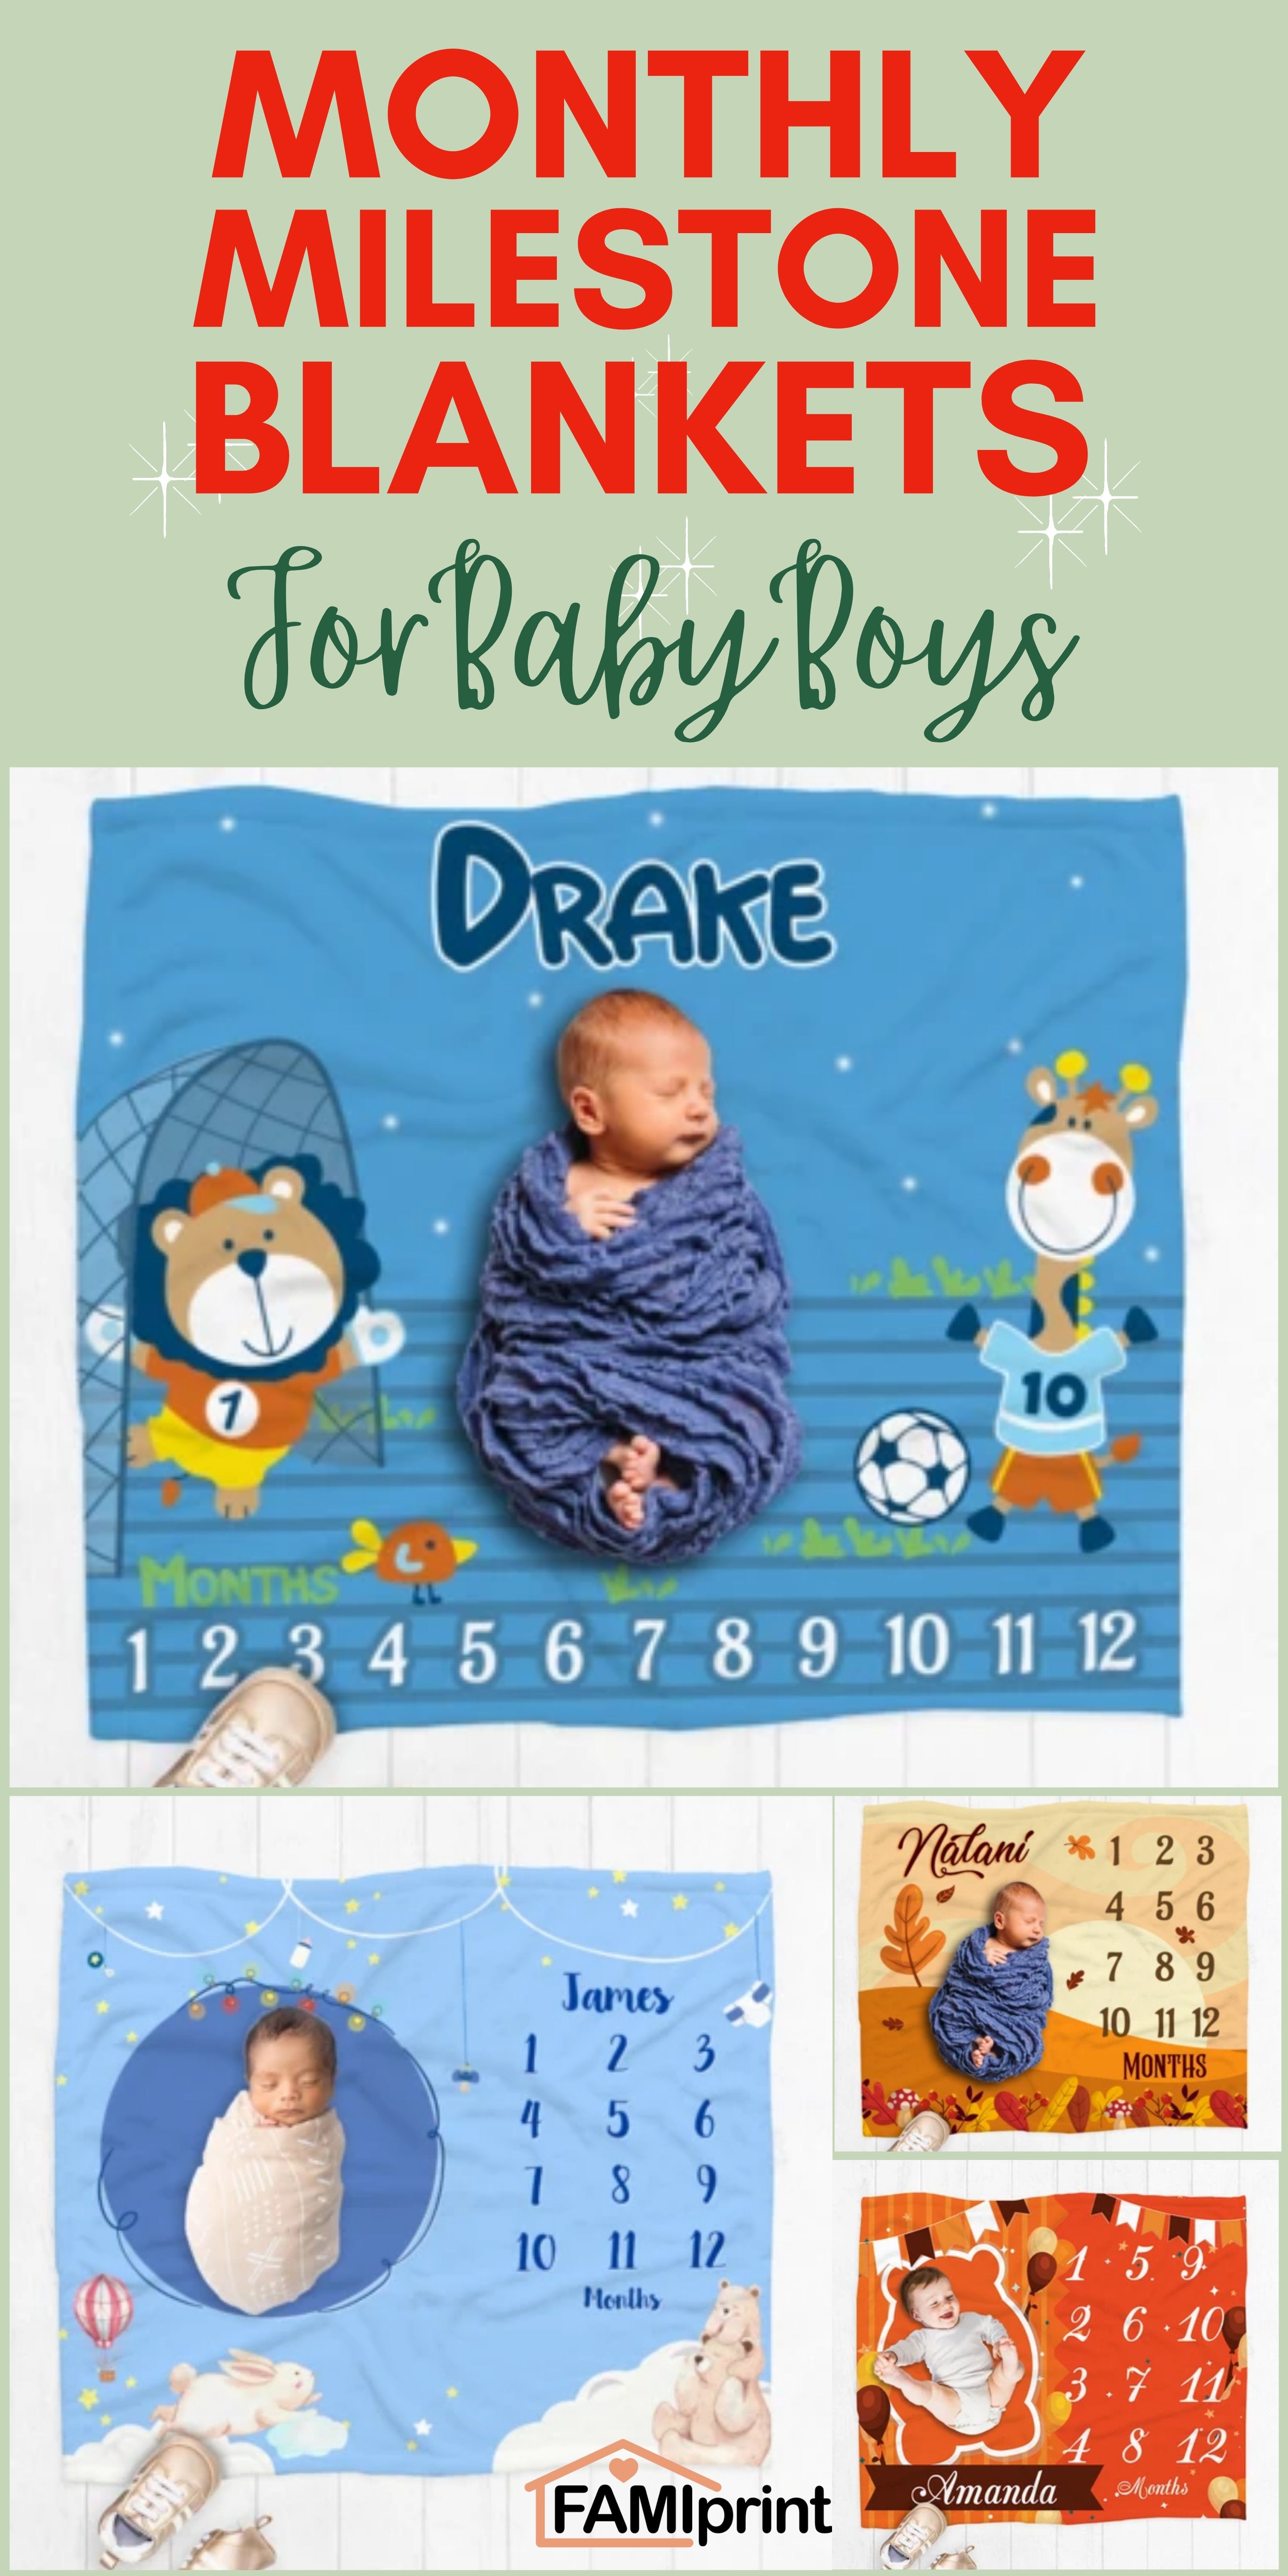 Personalized Monthly Milestone Blankets For Baby Boys | FamiPrints | Trending Personalized Family Gifts